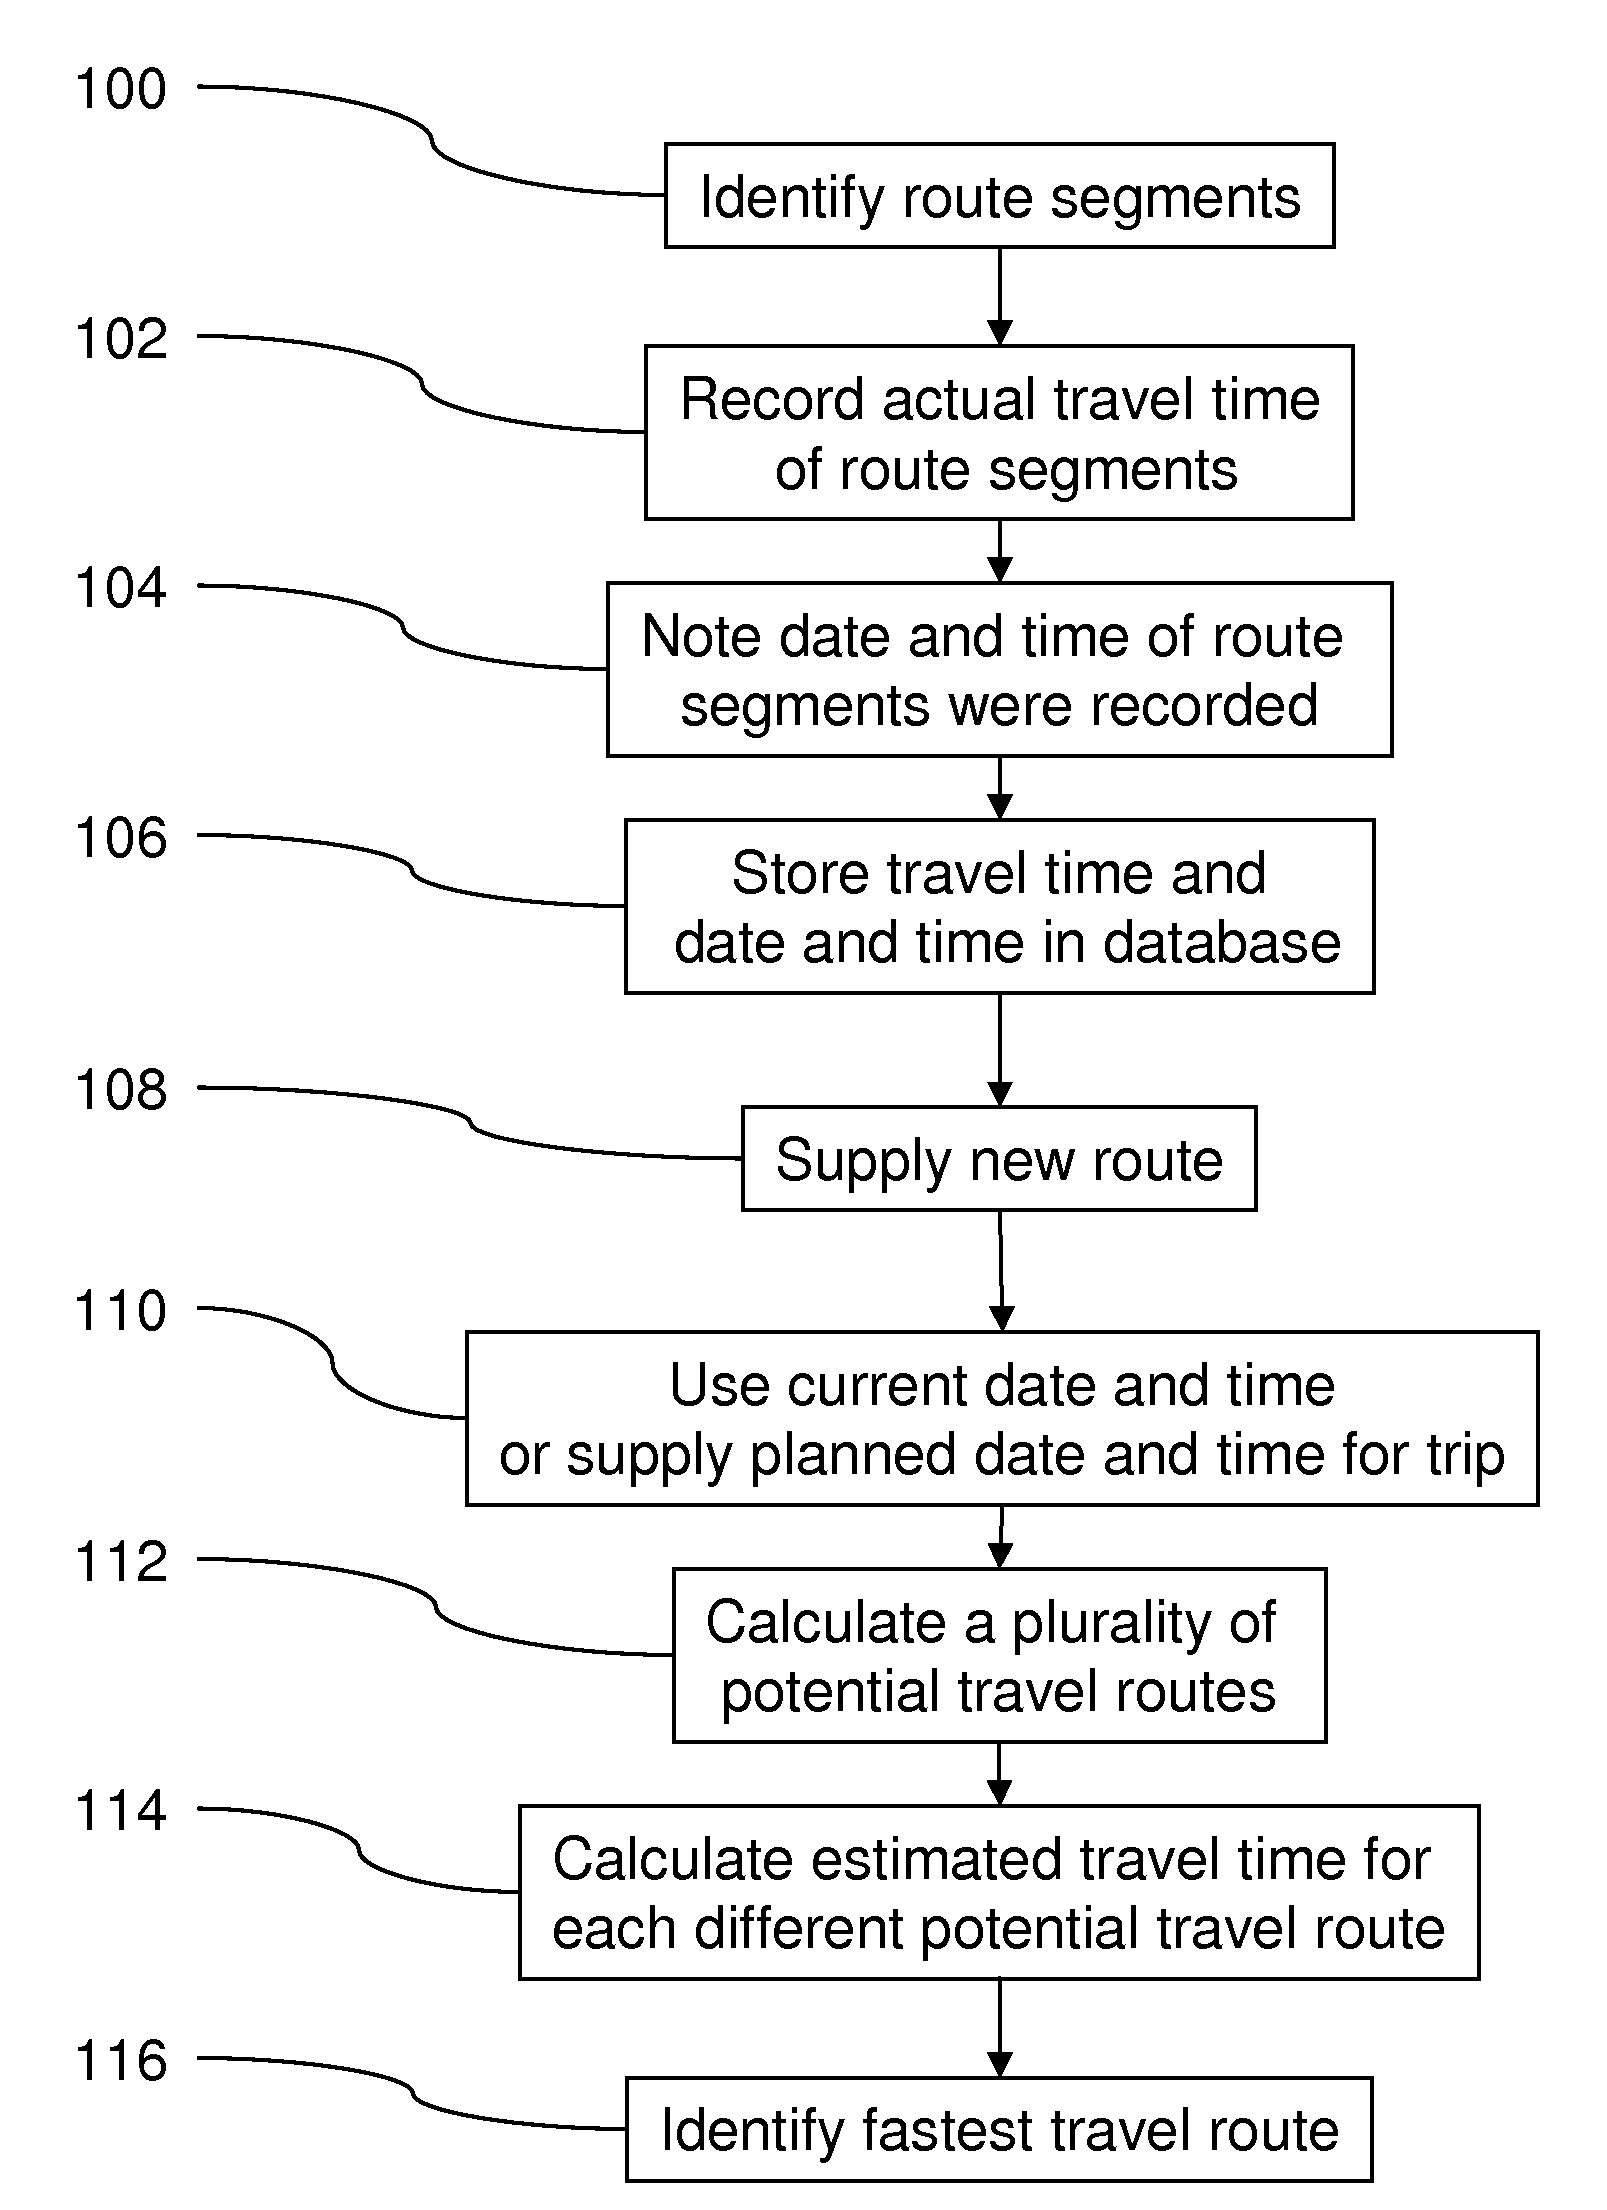 Design structure for adaptive route planning for gps-based navigation